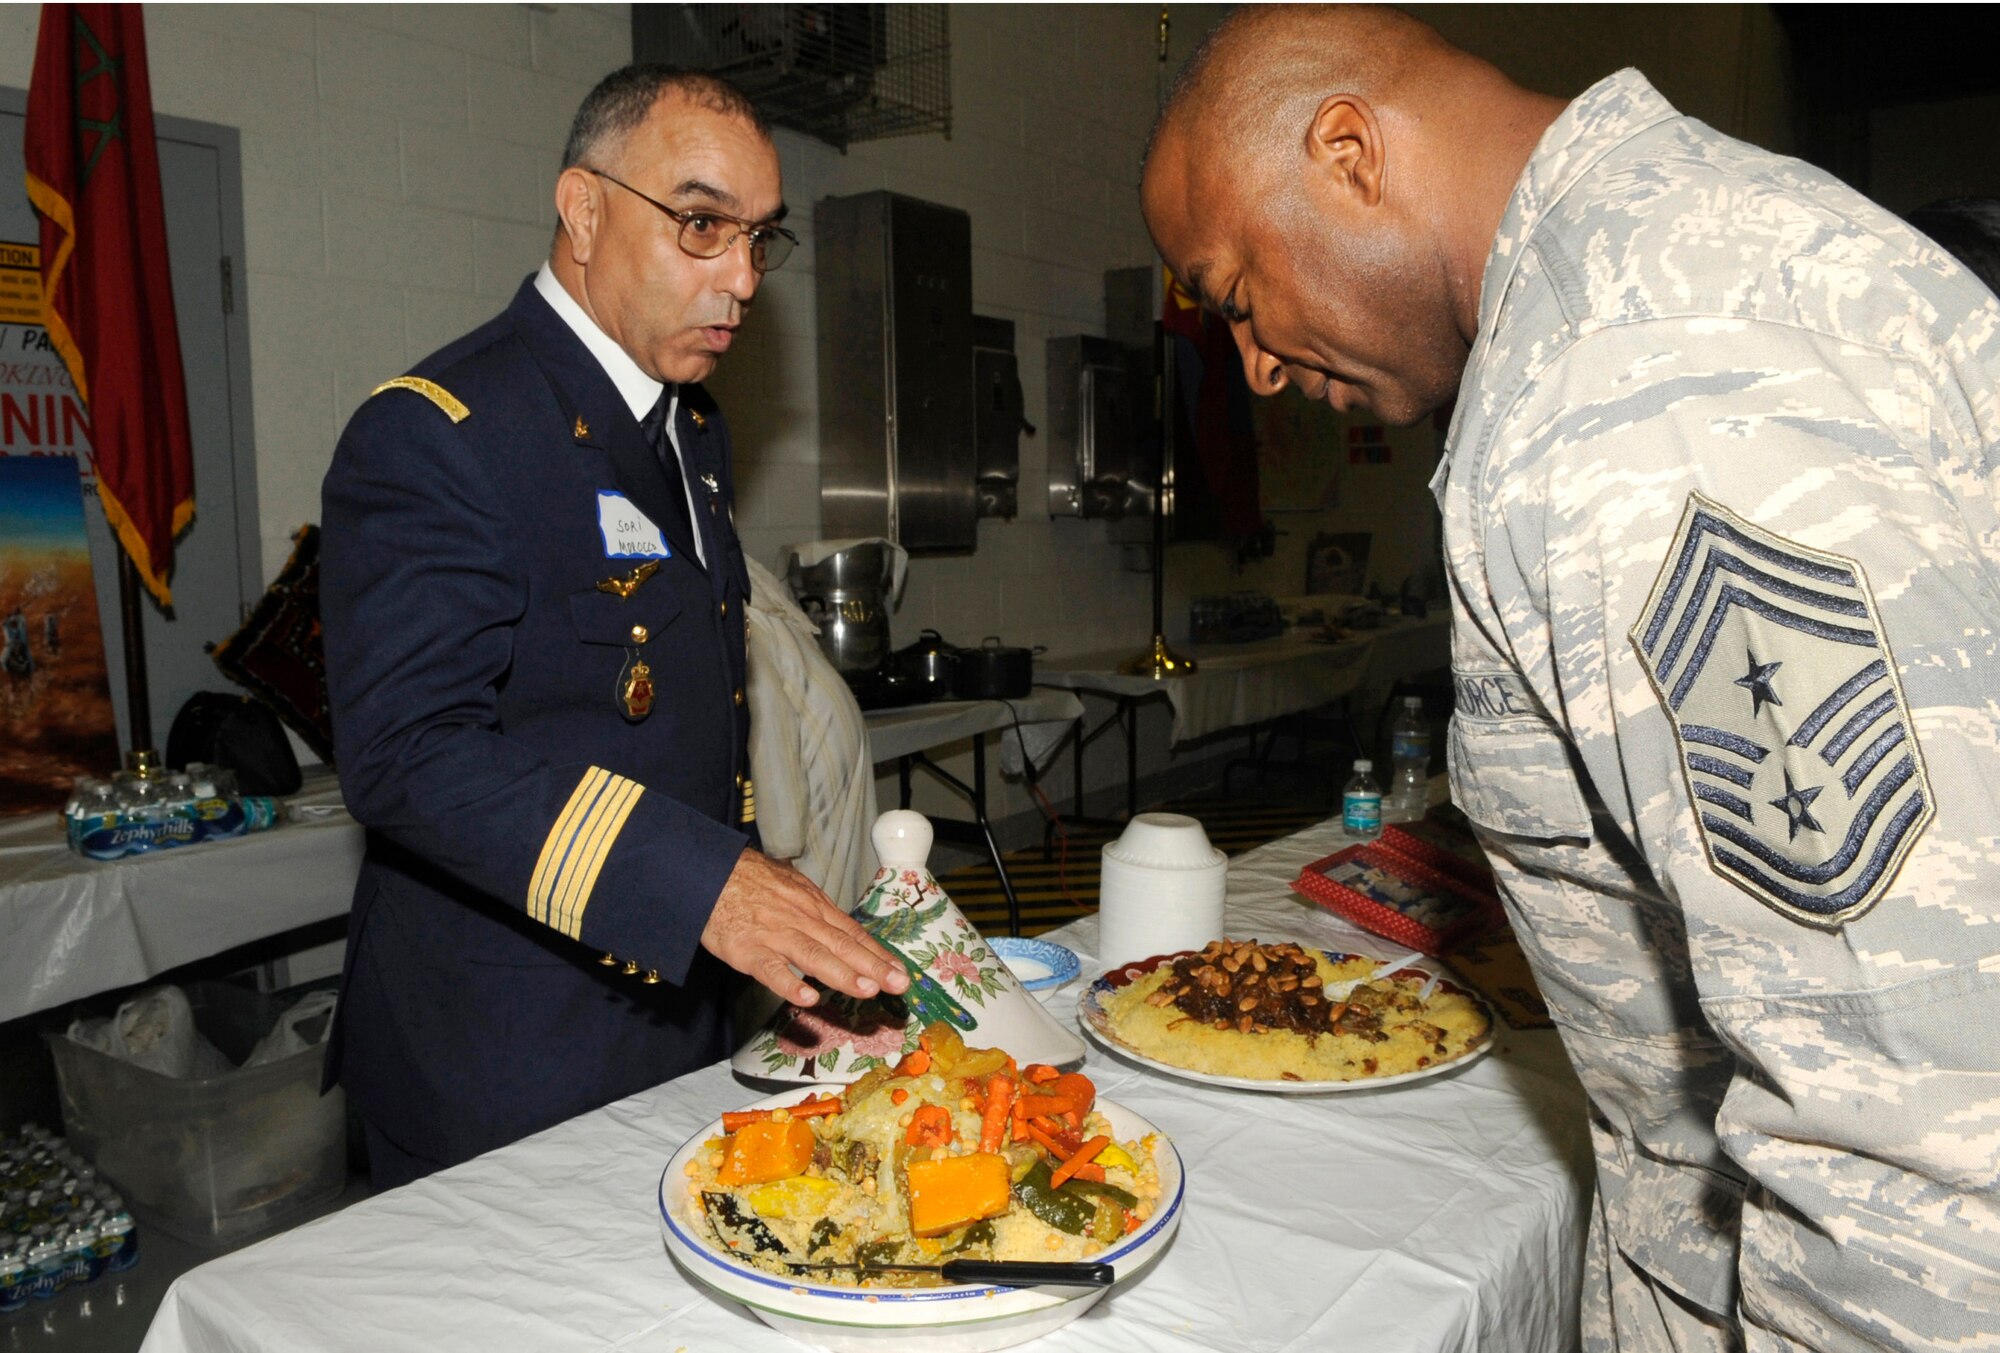 Col. Sori Nestaha from Morocco, offers a sample of couscous, or in Morocco, kuskus to Chief Master Sgt. Derrick Crowley, 6th Air Mobility Wing command chief during Coalition International Night held here Dec. 16 in Hangar 1. This year’s event marks the 5th anniversary of the annual tradition that allows military members and families to become more familiar with various native cuisines, customs and dress of the 63 different countries represented in the U.S. Central Command Coalition Village. During this event many Coalition members and their families volunteered to cook some of their countries favorite or famous cuisines to share. The event ended with the United States Central Command commander, Gen. David Petraeus, giving a thank you speech to all those who came out. 